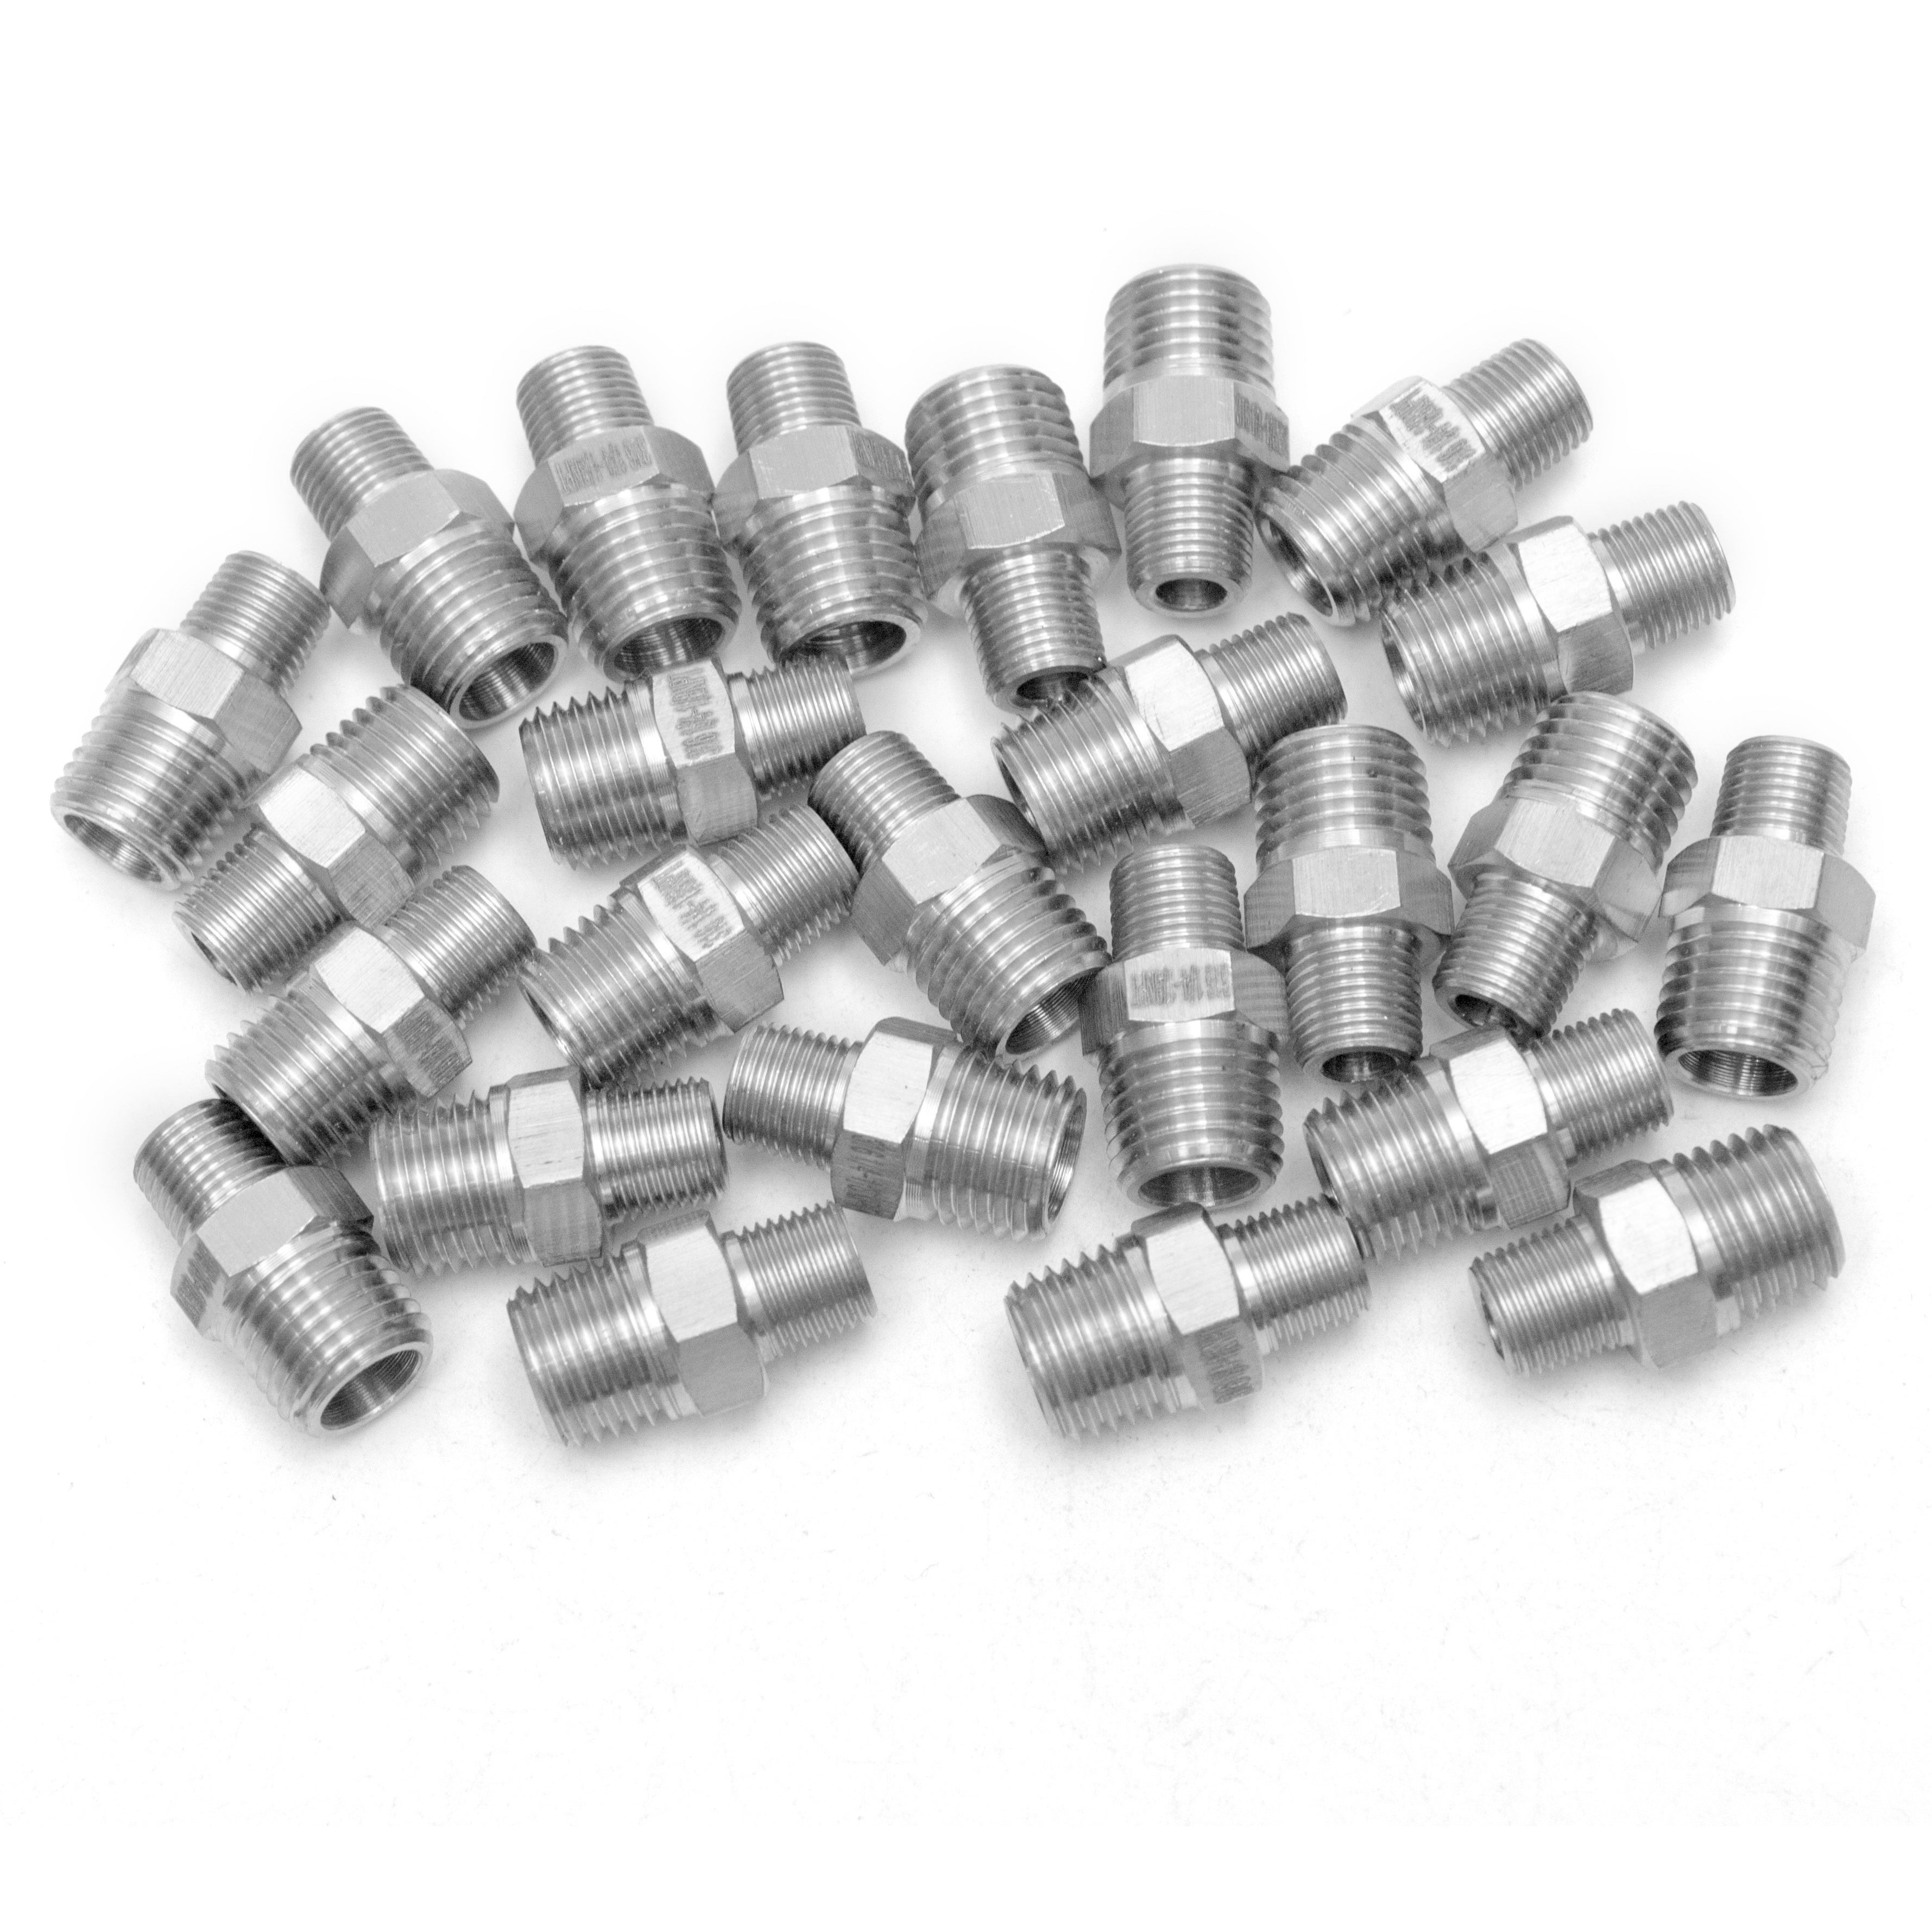 LTWFITTING Bar Production Stainless Steel 316 Pipe Hex Reducing Nipple Fitting 1/4 Inch x 1/8 Inch Male NPT Water Boat (Pack of 25)